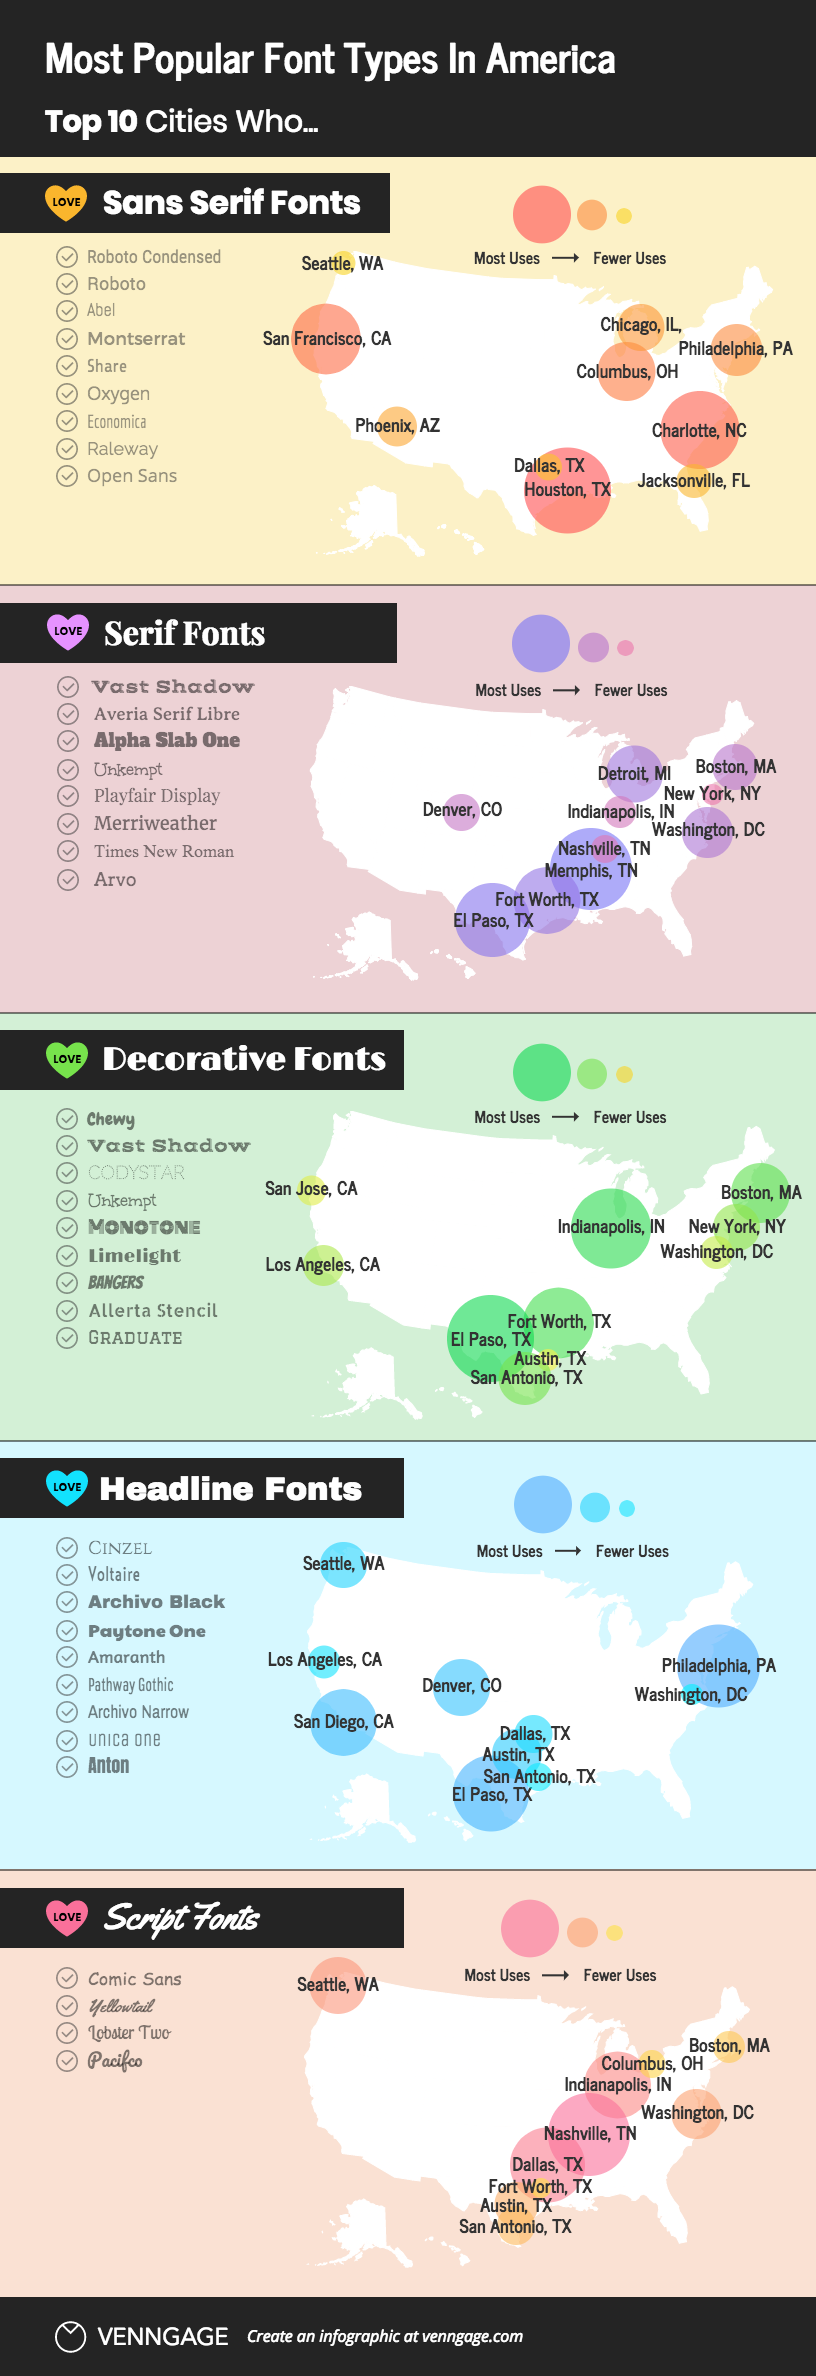 The Most Popular Font Types In America - #Infographic